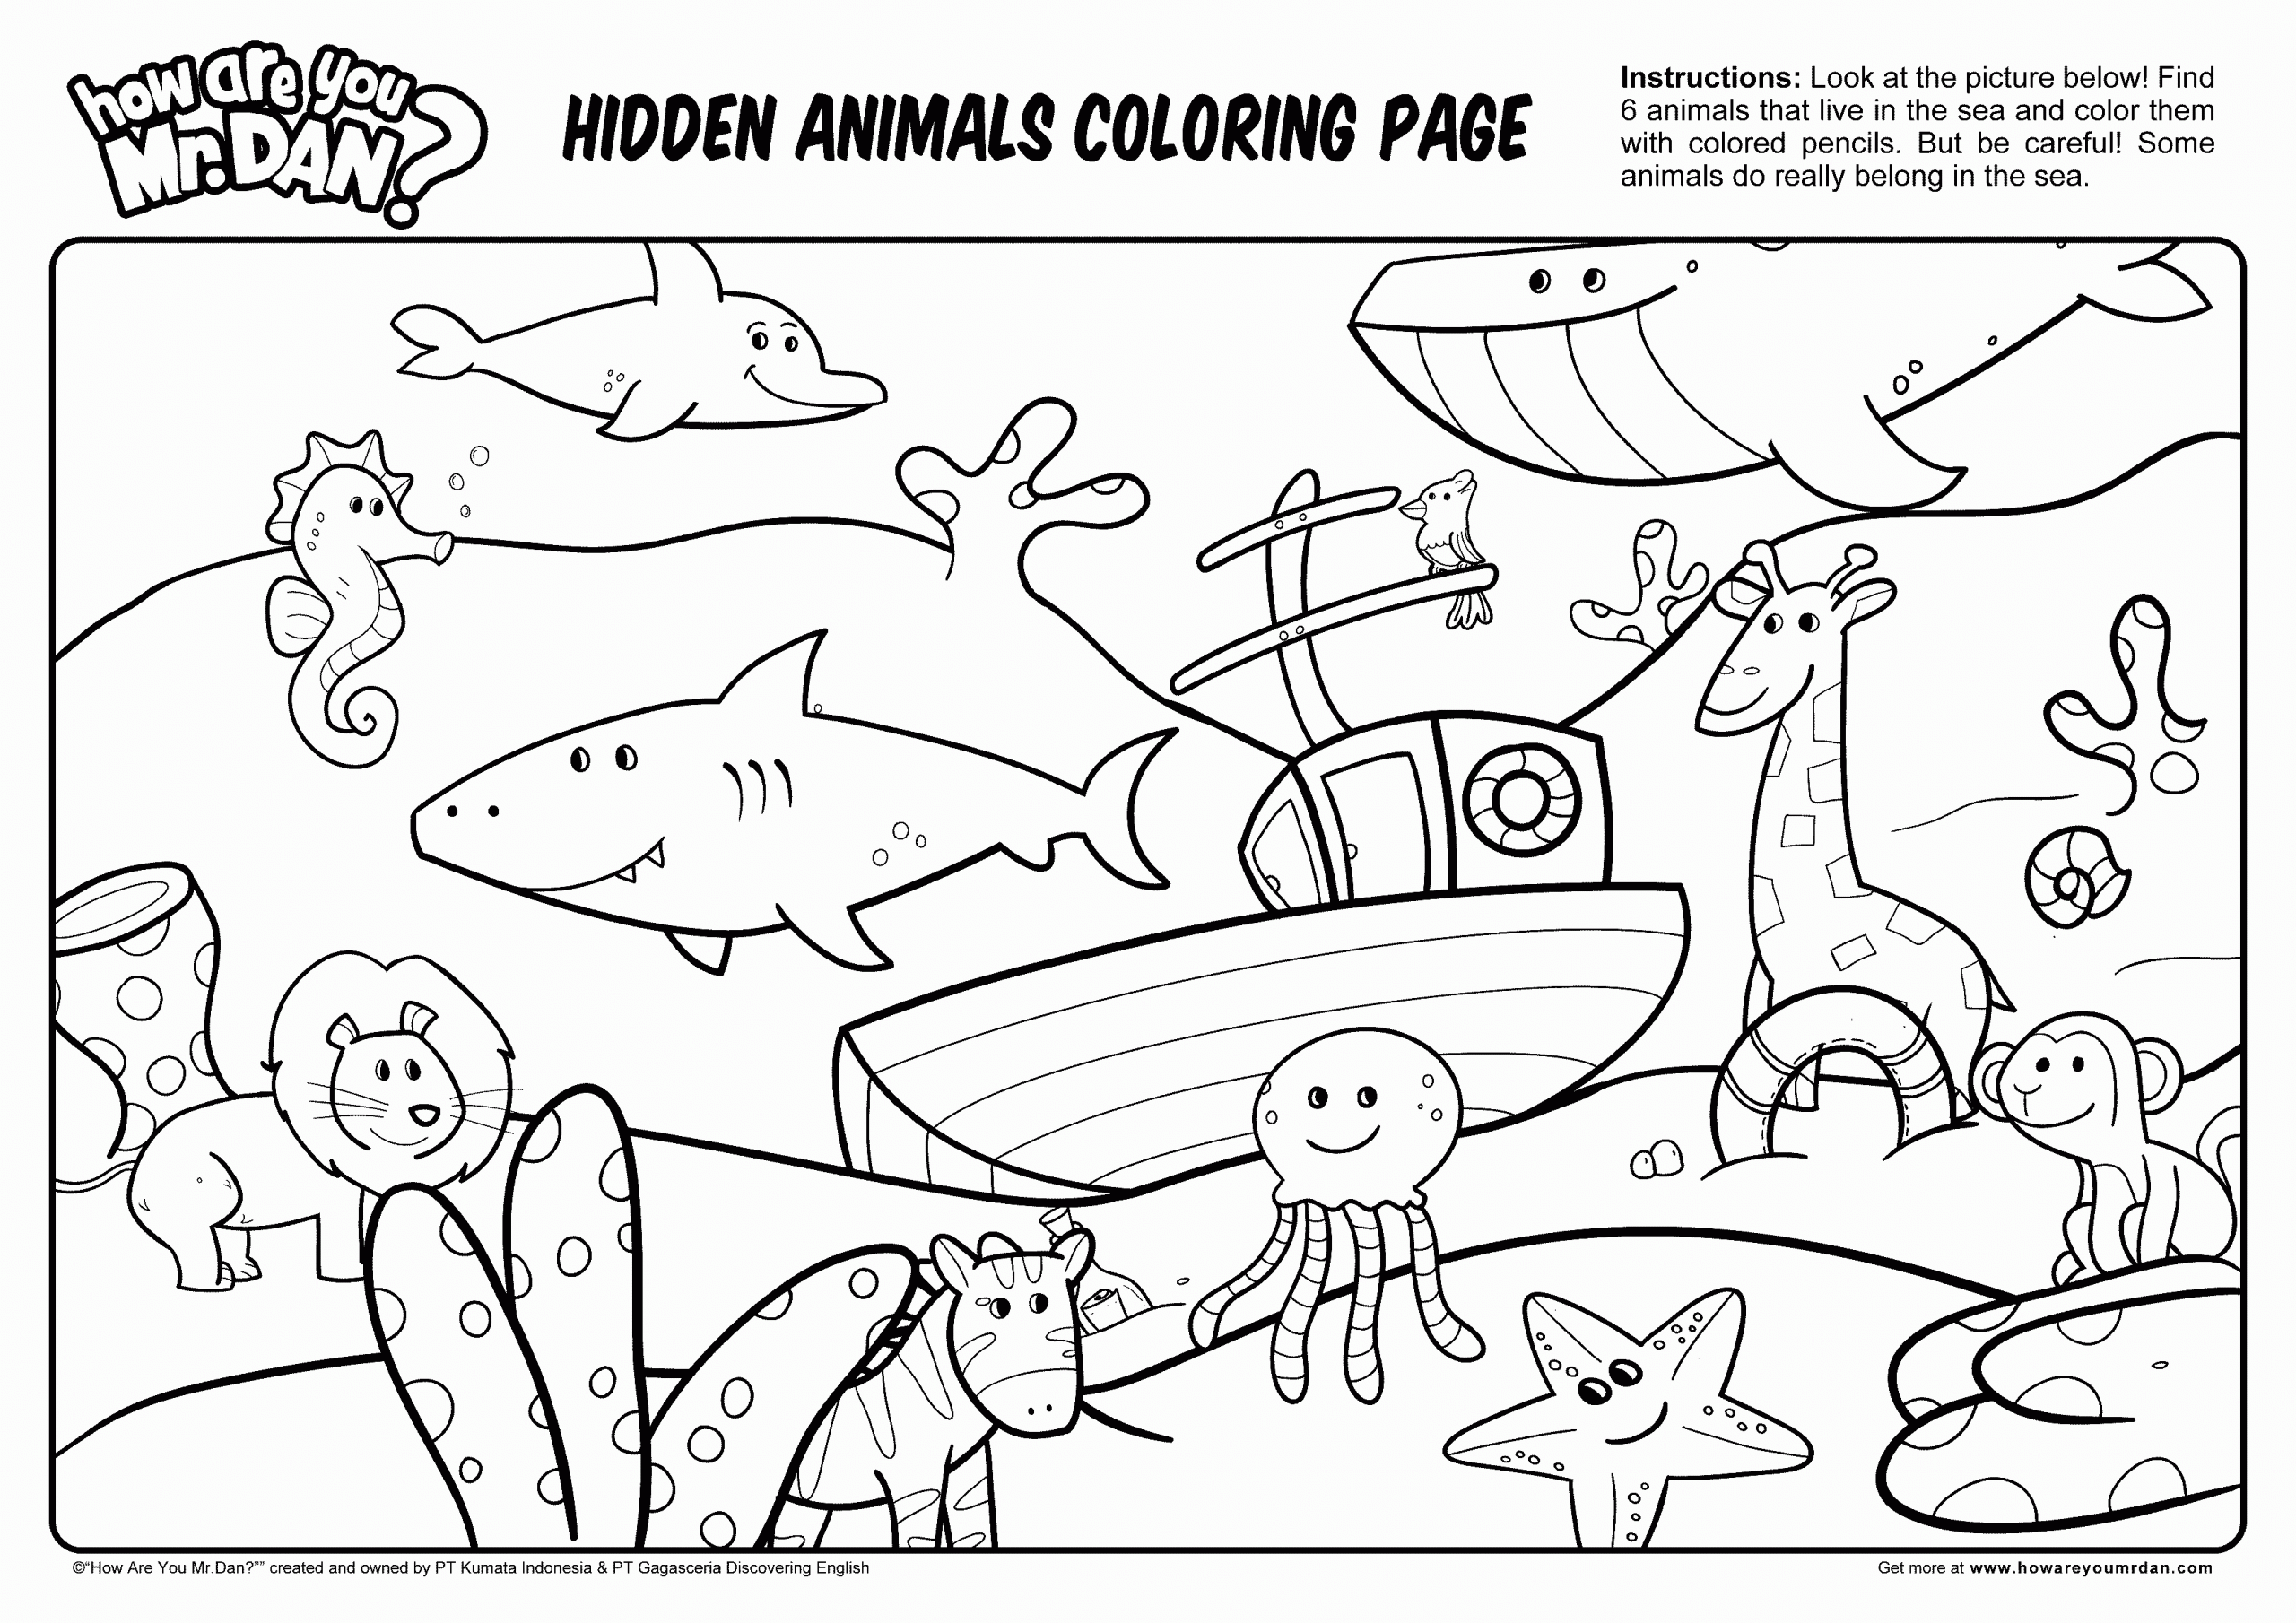 Hidden Animal Pictures Worksheets Fresh Hidden Animals Coloring Page Printables Kids How are